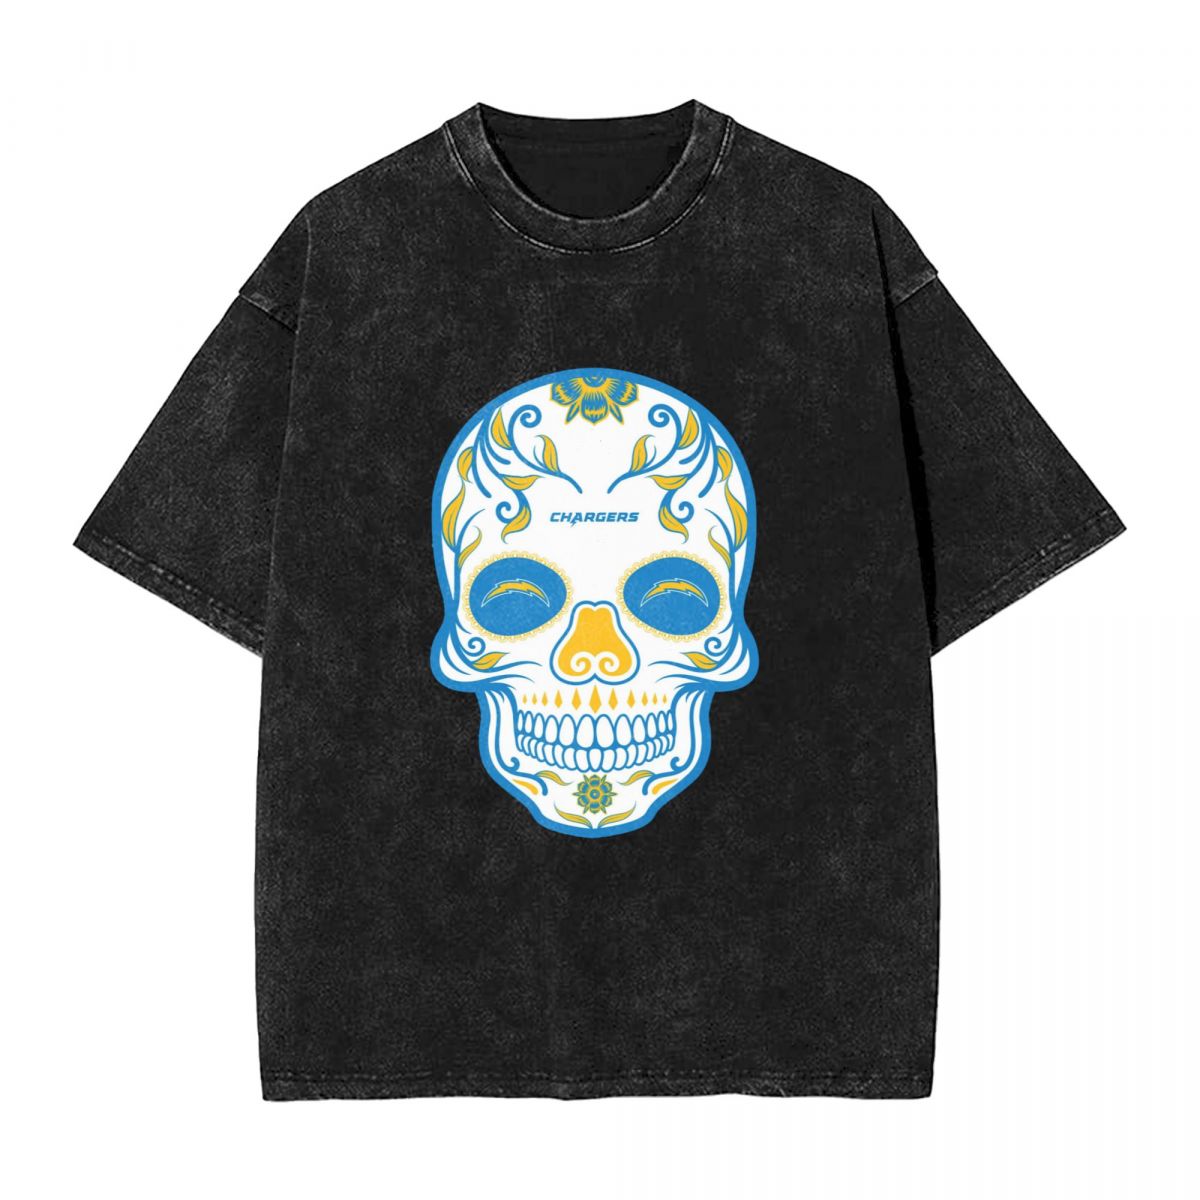 Los Angeles Chargers Skull Vintage Oversized T-Shirt Men's